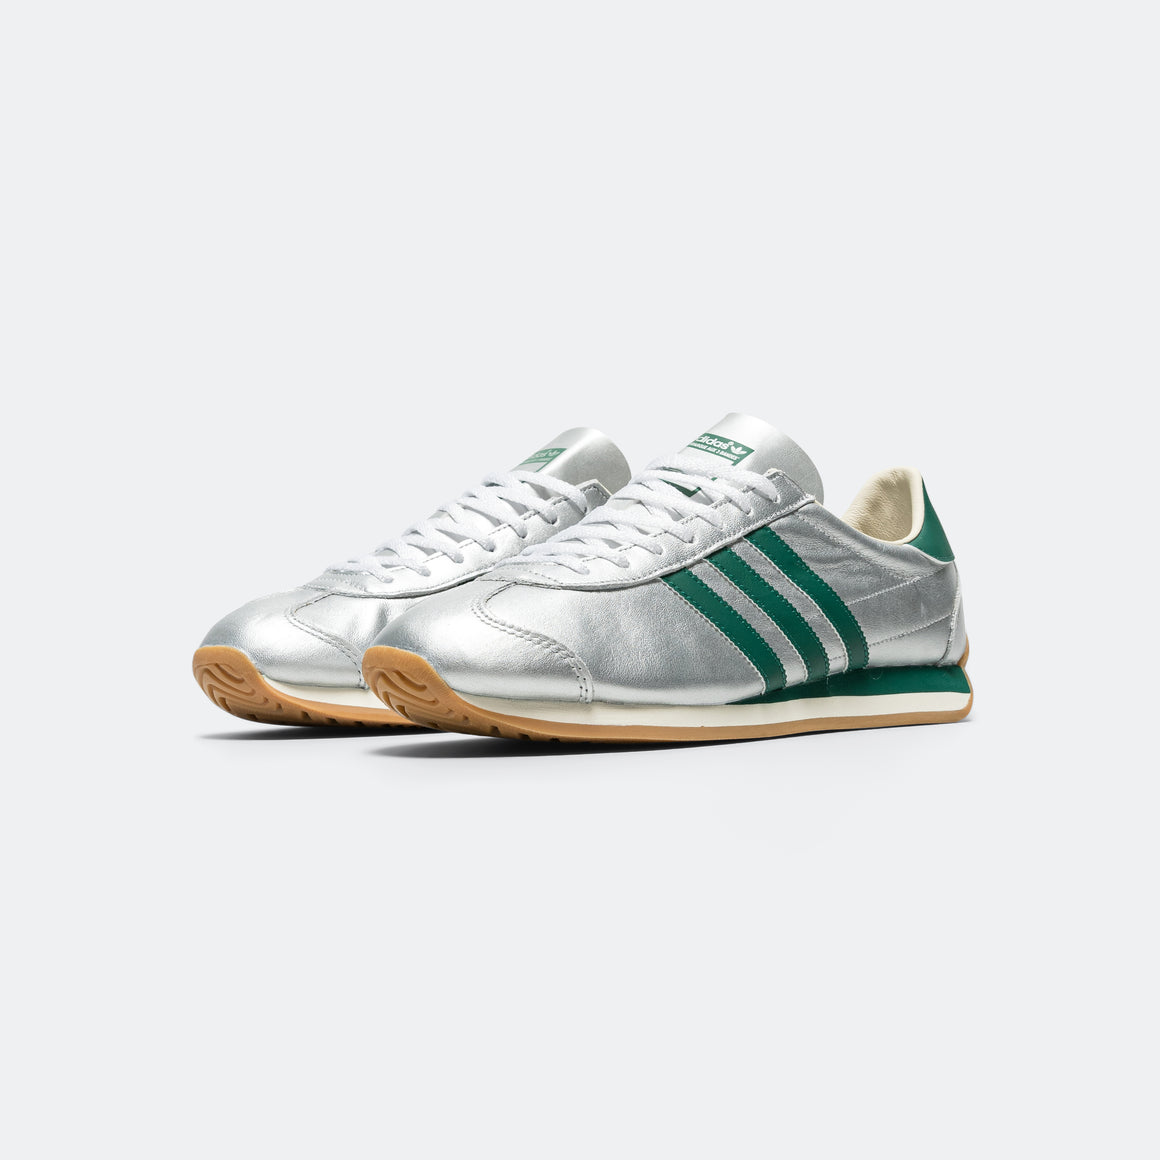 adidas - Womens Country OG - Silver Metallic/Collegiate Green - UP THERE